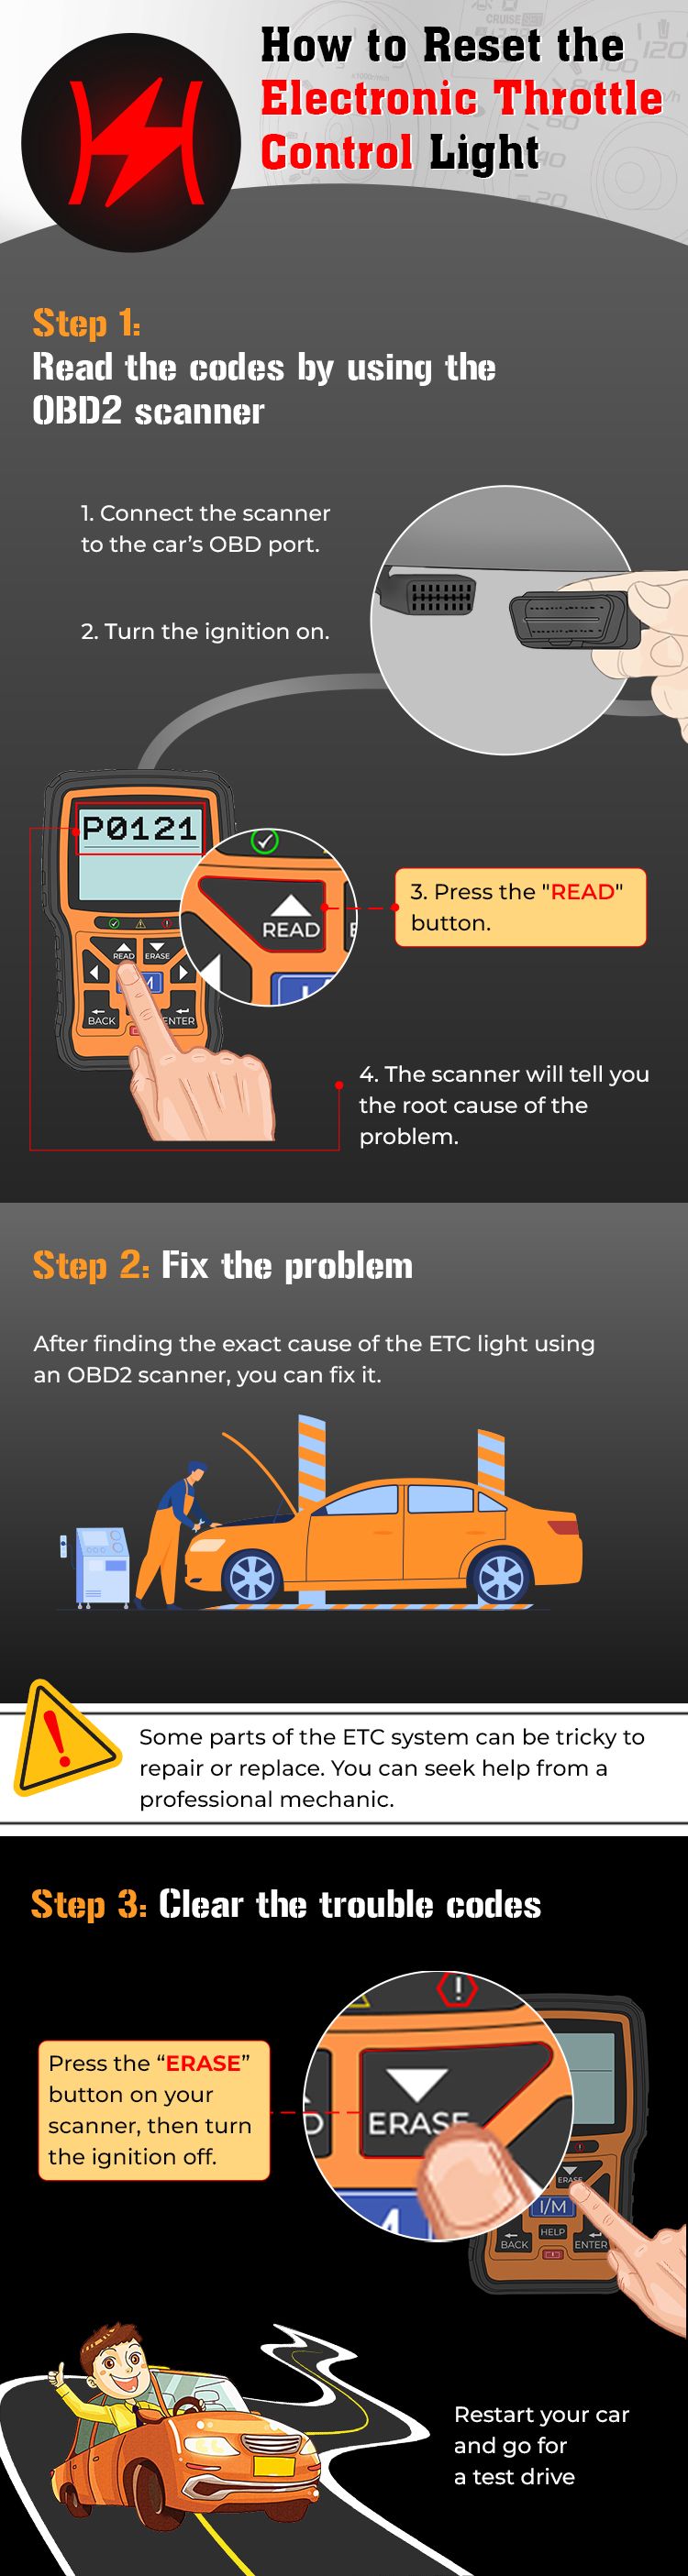 How to Reset the Electronic Throttle Control Light